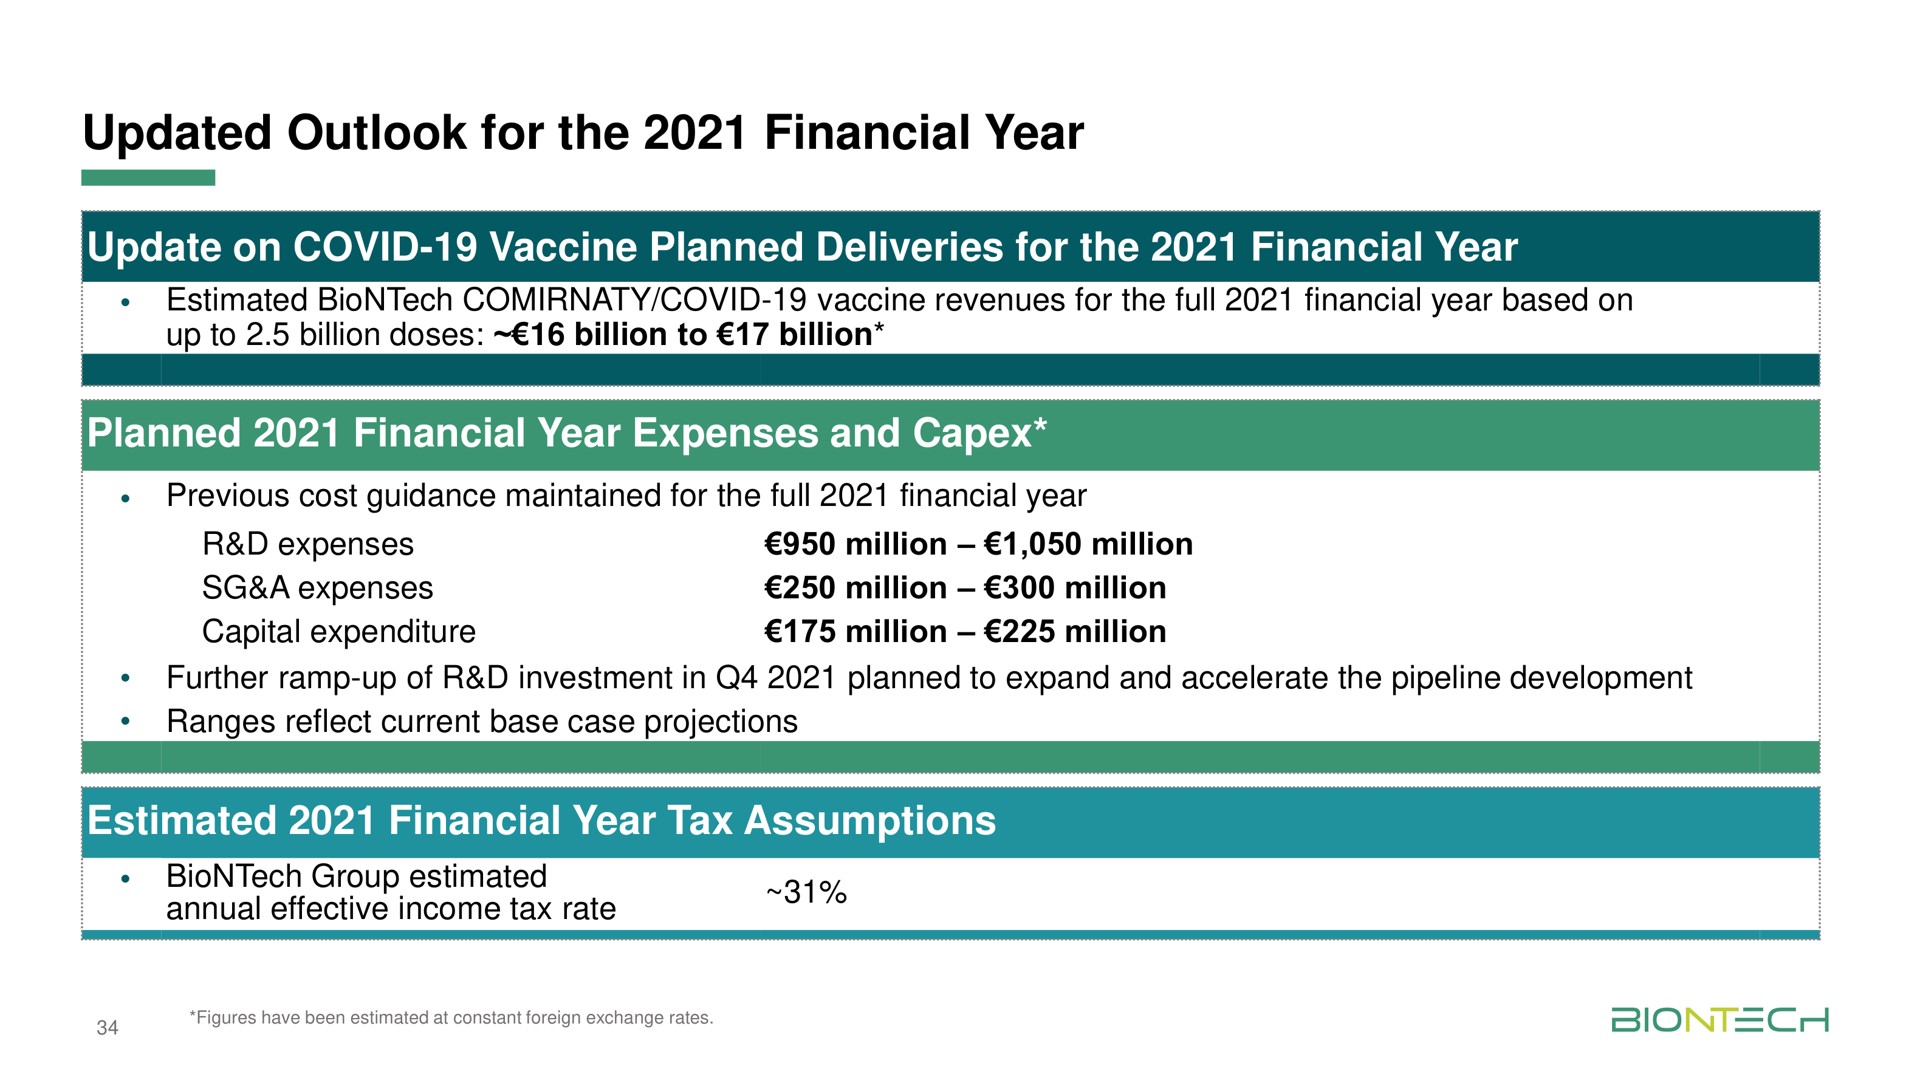 updated outlook for the financial year update on covid vaccine planned deliveries for the financial year planned financial year expenses and estimated financial year tax assumptions | BioNTech